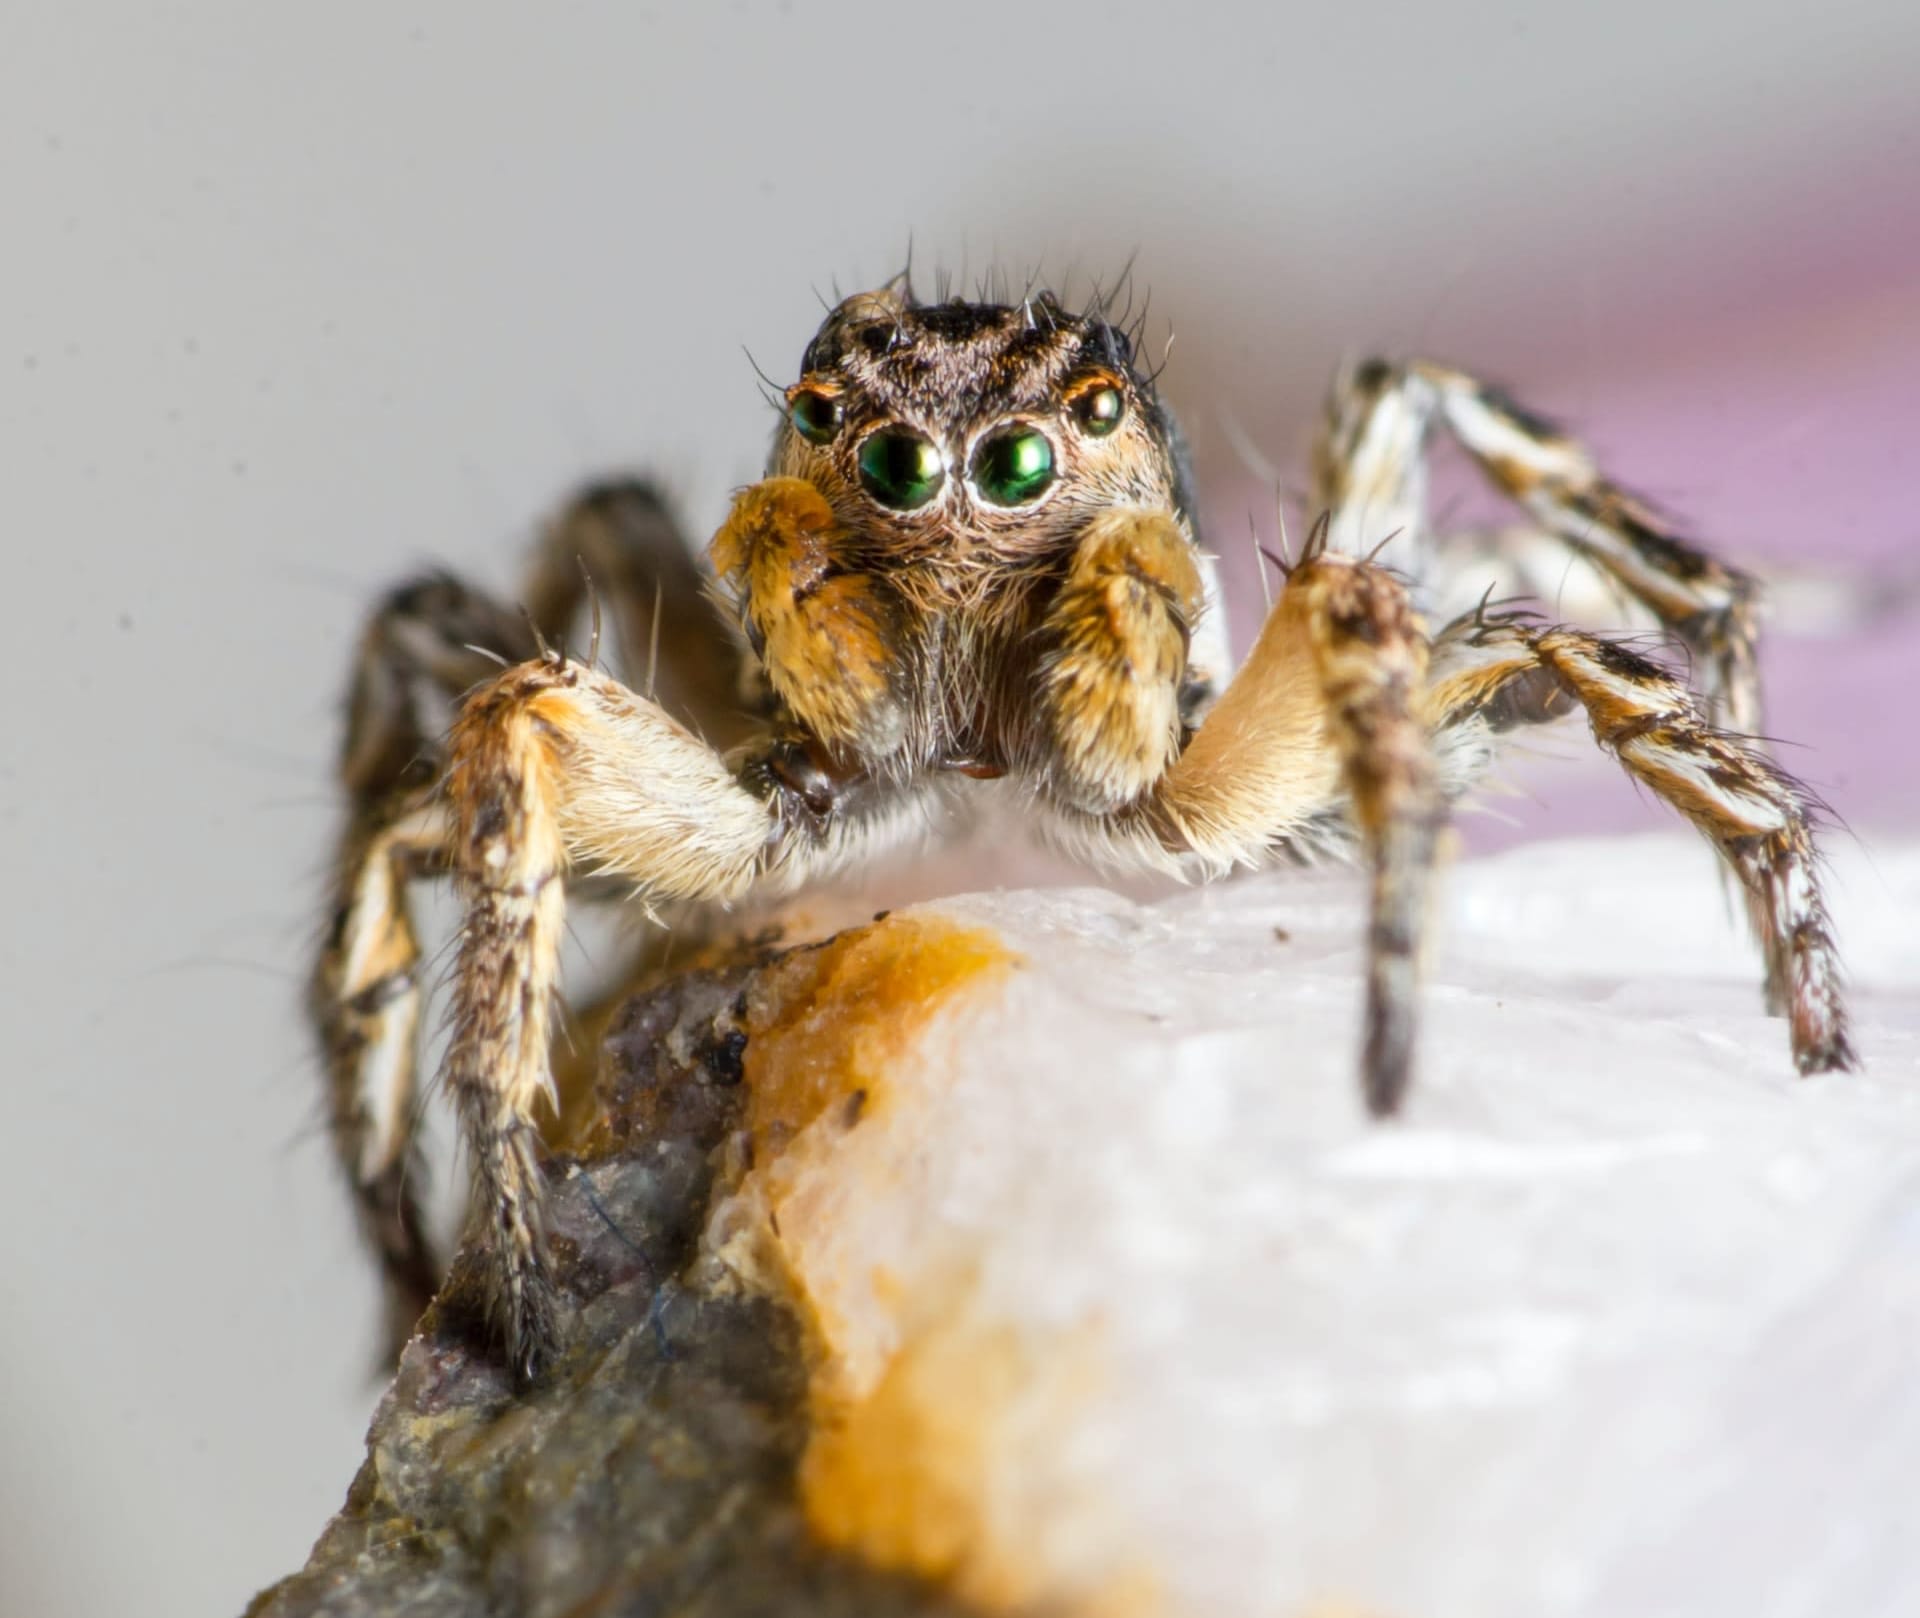 Jumping Spiders For Sale - Affordable Shipping - Phidippus Regius – Spiders  Source, jumping spider 